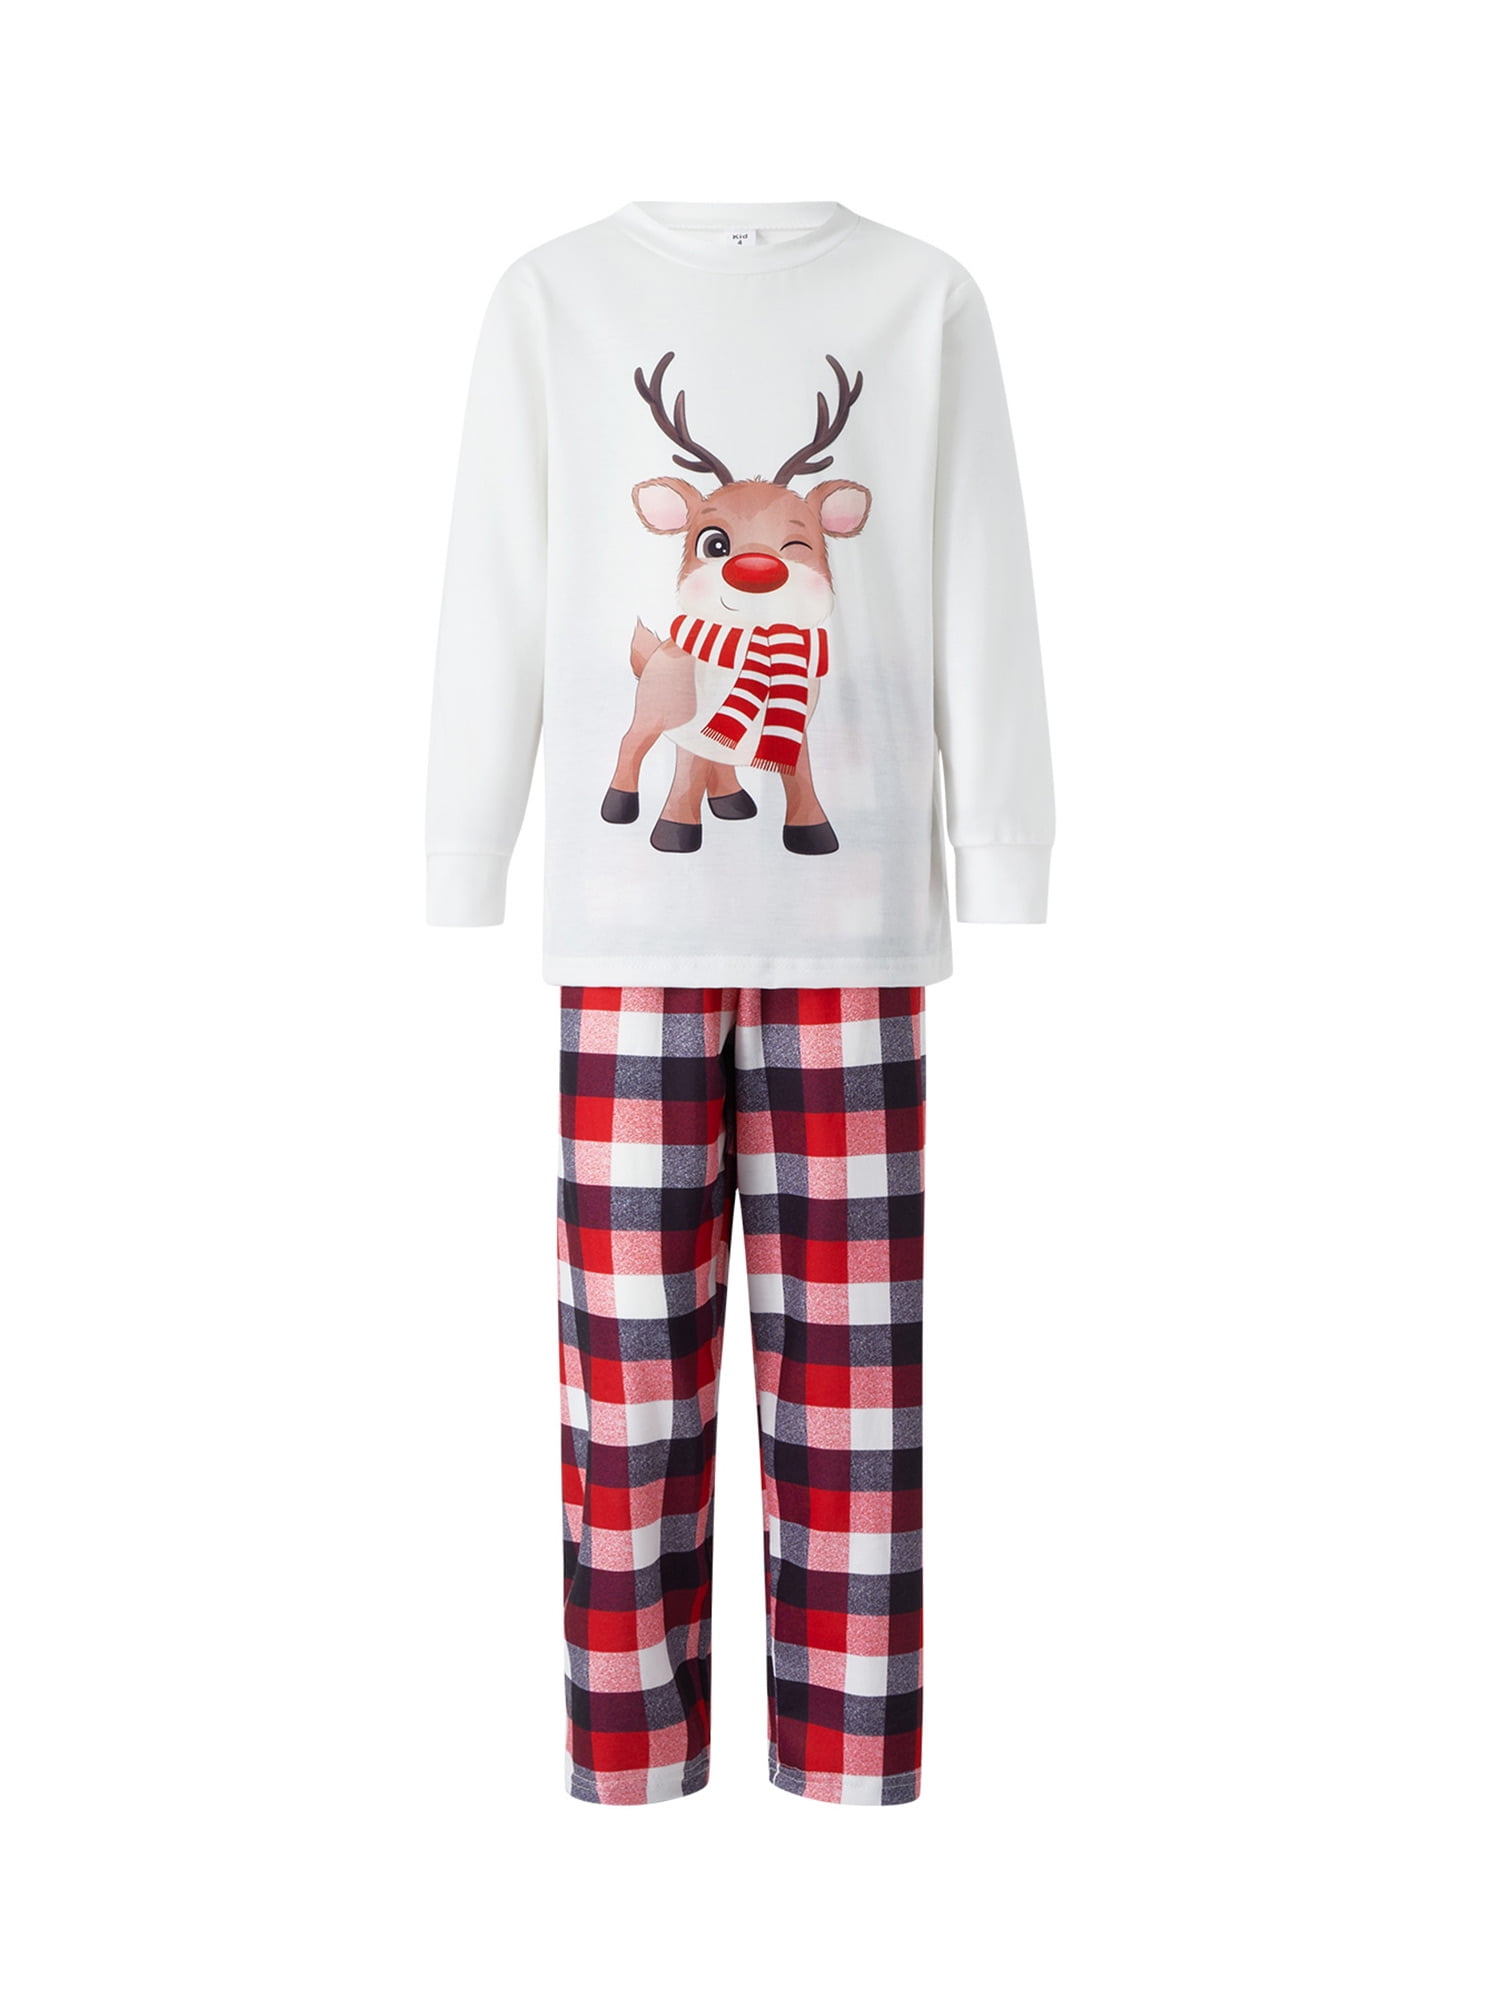  HNCS Matching Family Pajamas Elk Santa Matching PjsFamily  Outfit Sets Jammies for Couples Youth Dark Gray : Ropa, Zapatos y Joyería